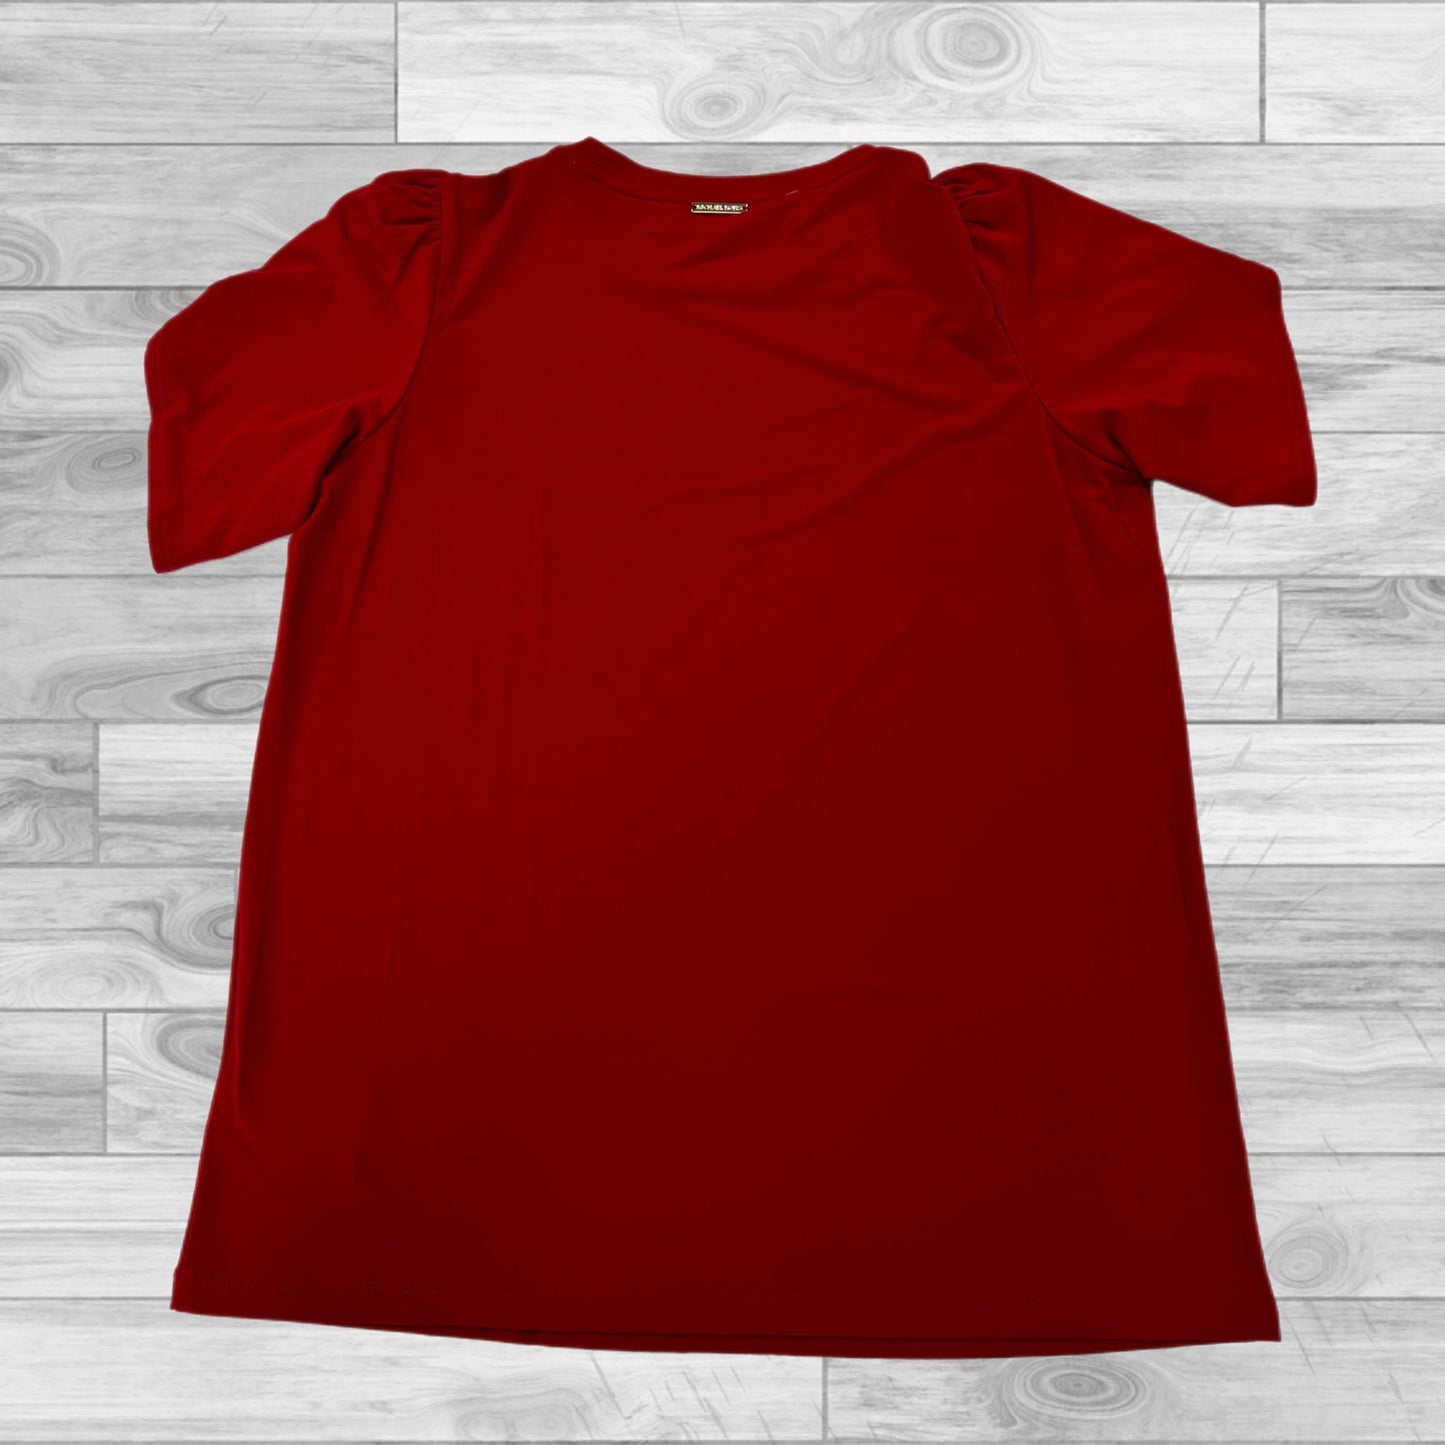 Red Top Short Sleeve Michael By Michael Kors, Size S